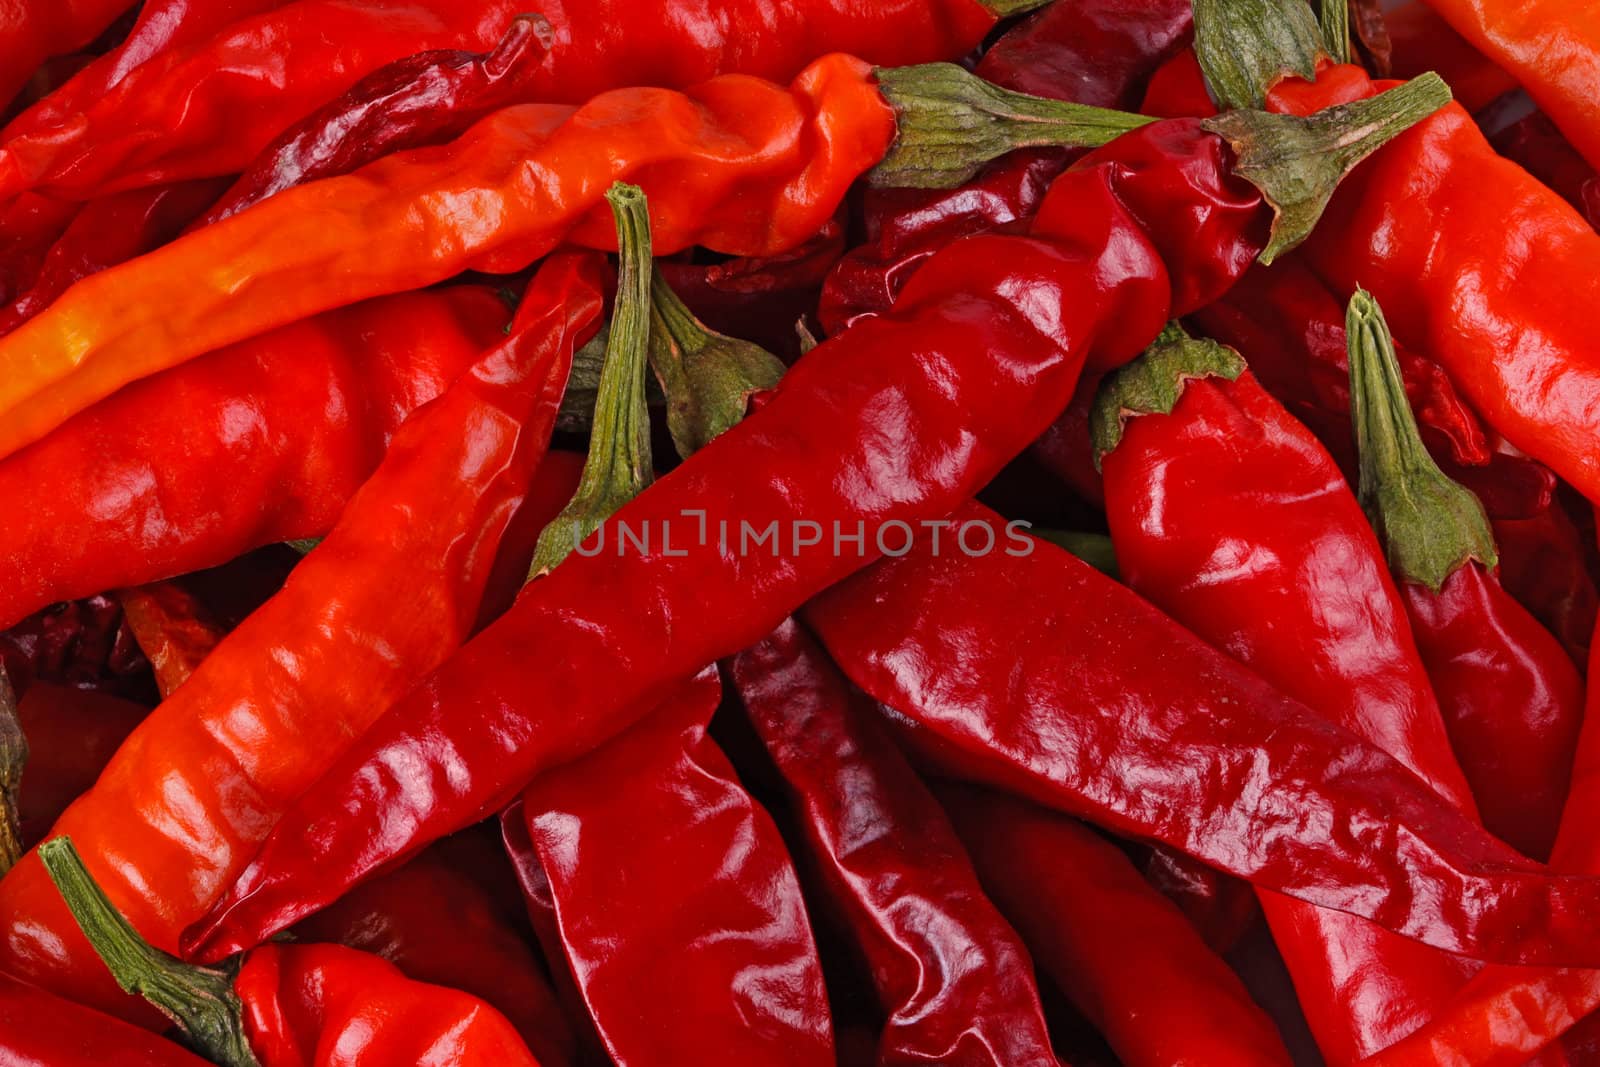 Dried red hot chili peppers fill the frame by sgoodwin4813